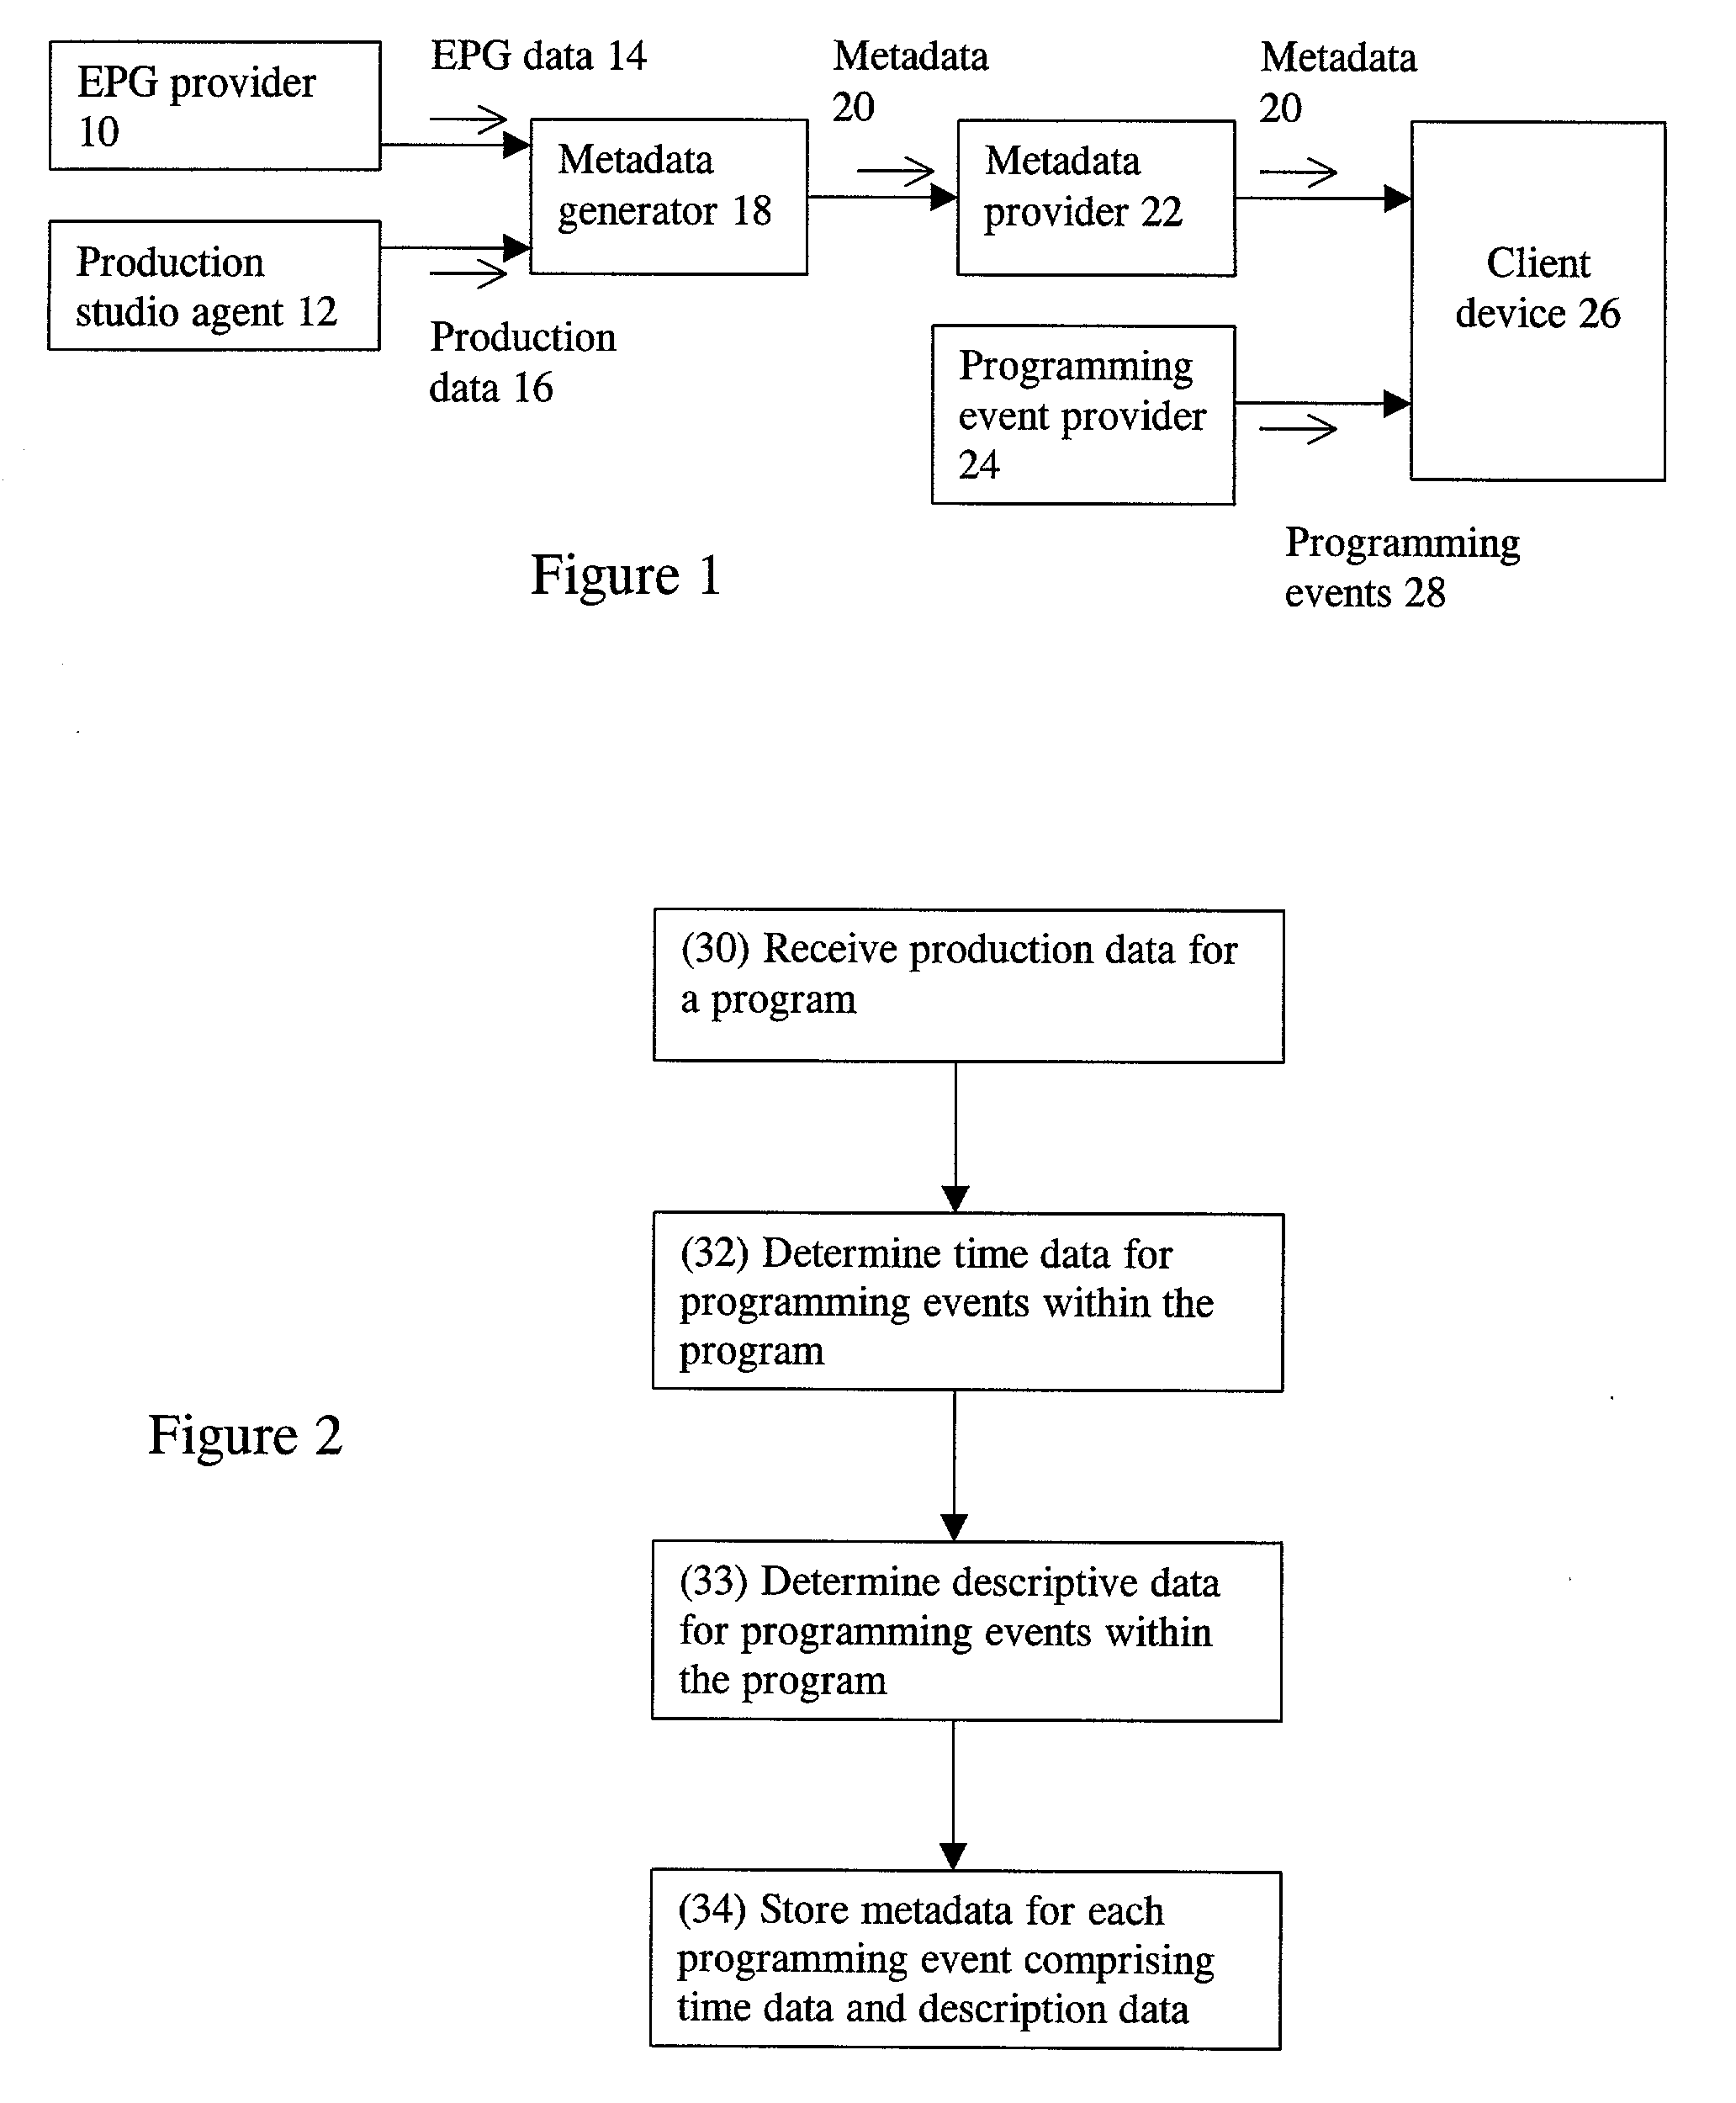 System and method for generating metadata for video programming events